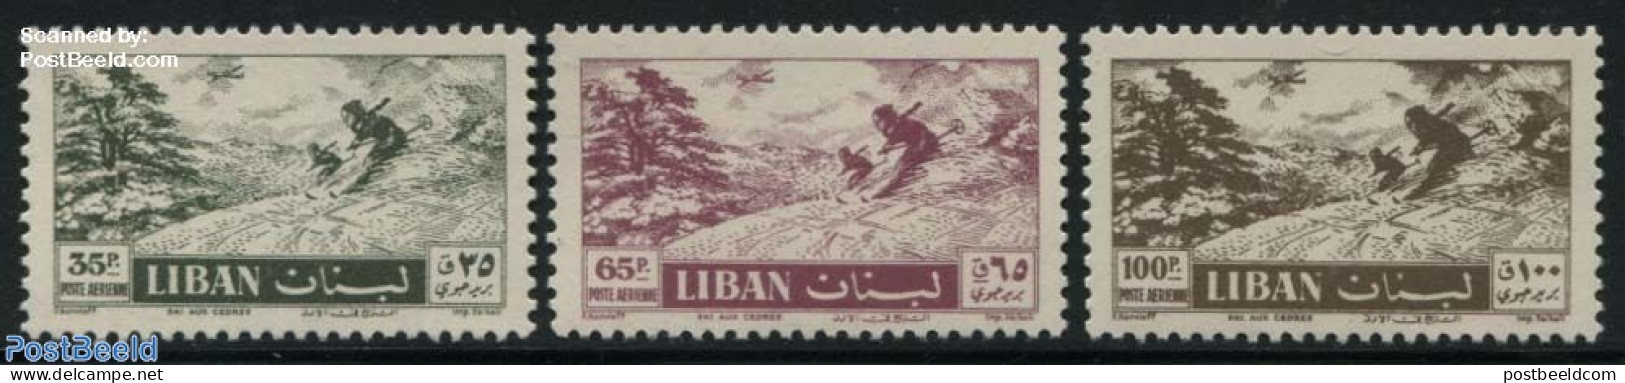 Lebanon 1957 Definitives, Skiing 3v, Mint NH, Nature - Sport - Trees & Forests - Skiing - Rotary, Lions Club